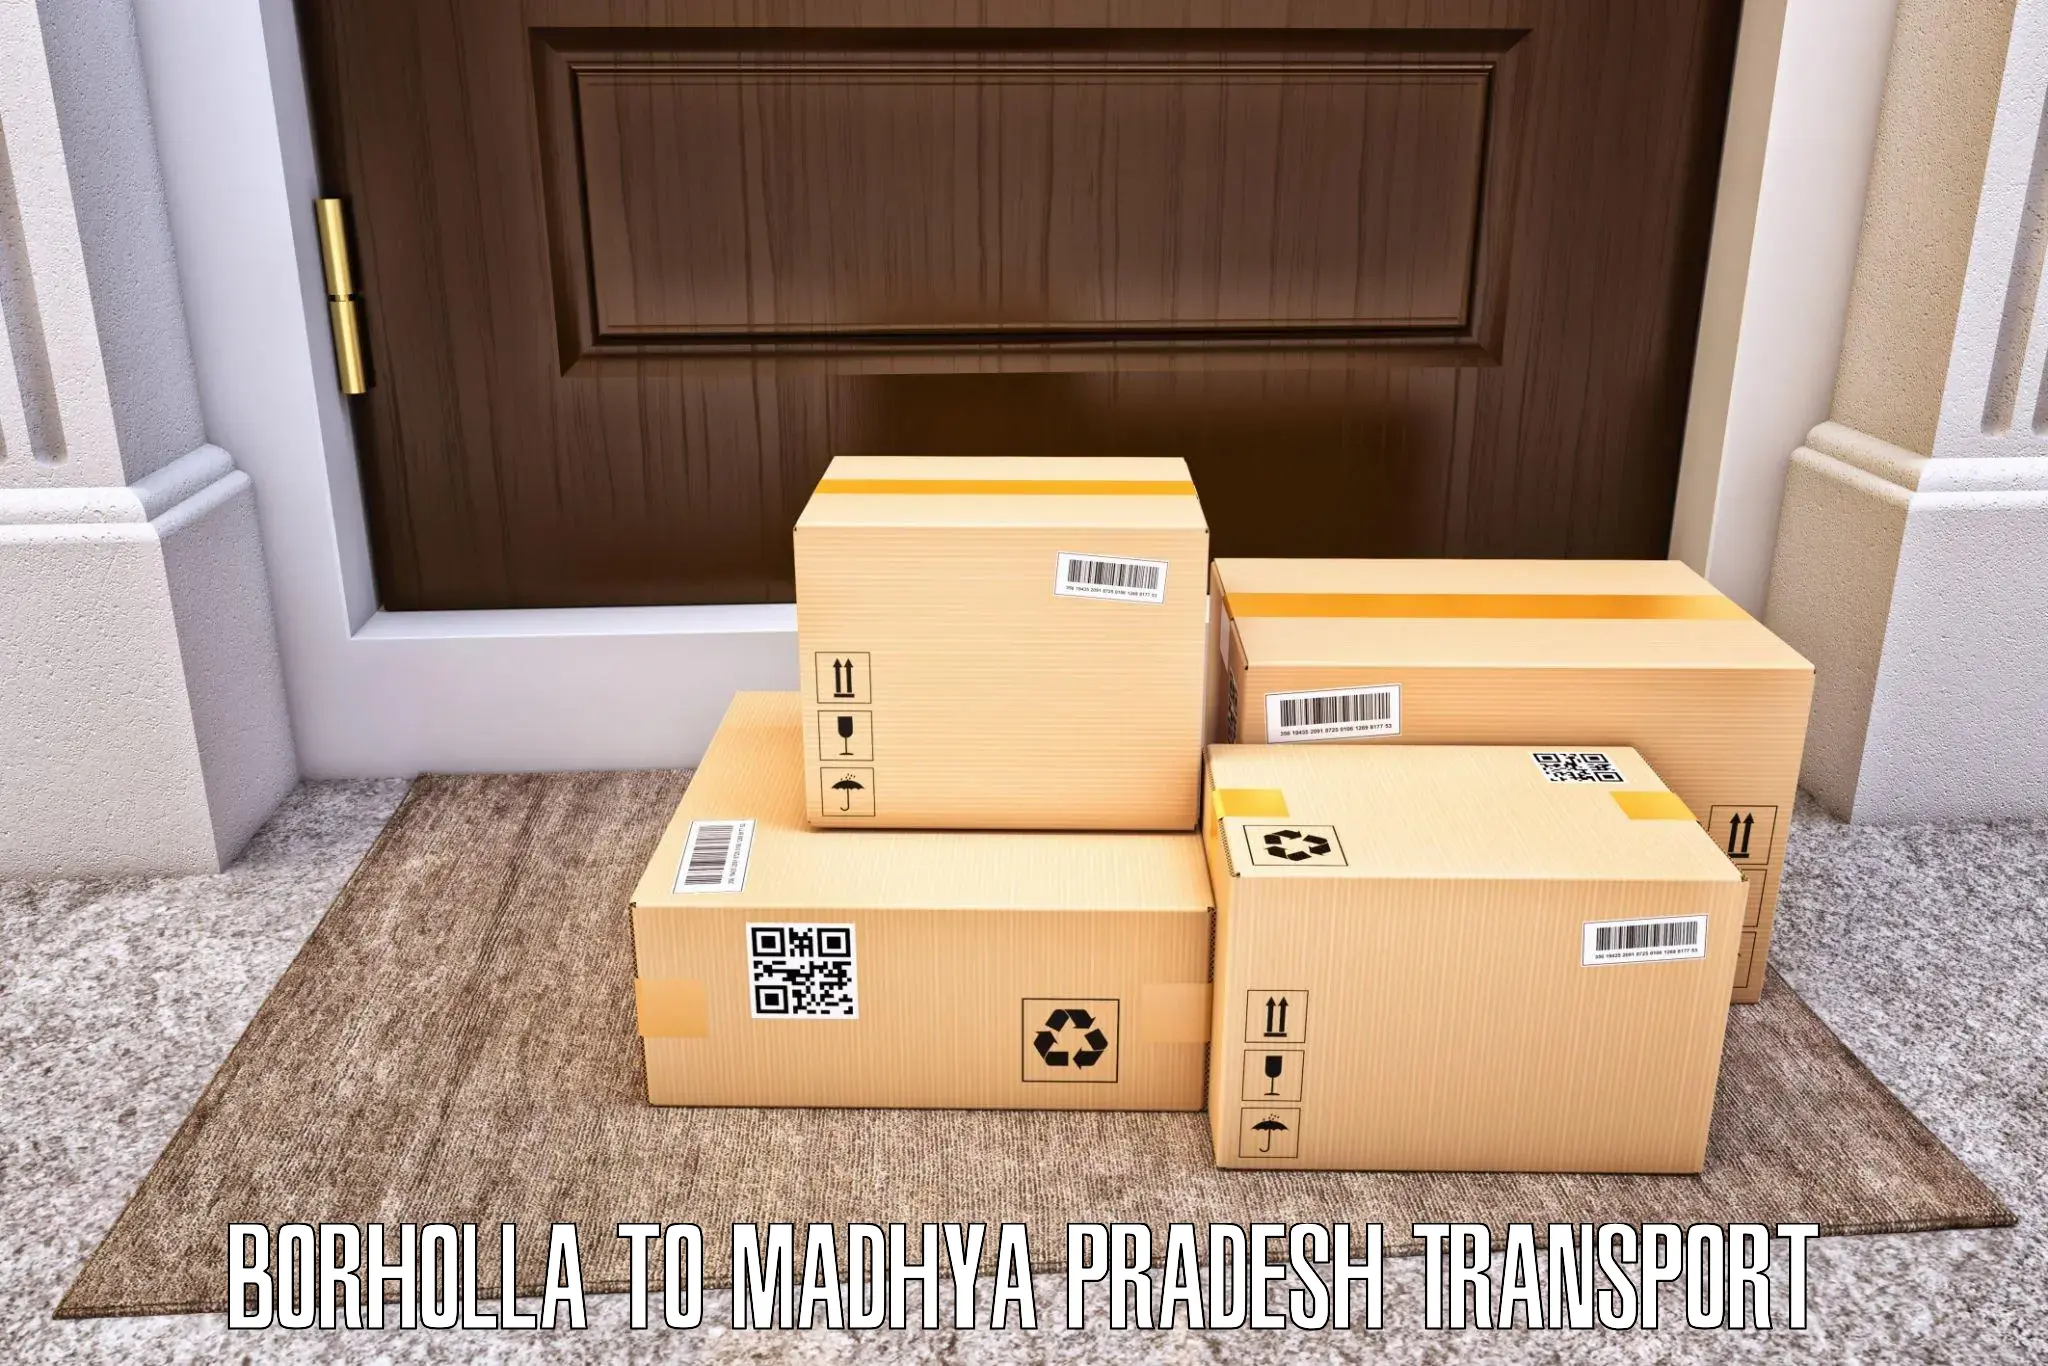 Vehicle courier services in Borholla to Amarwara